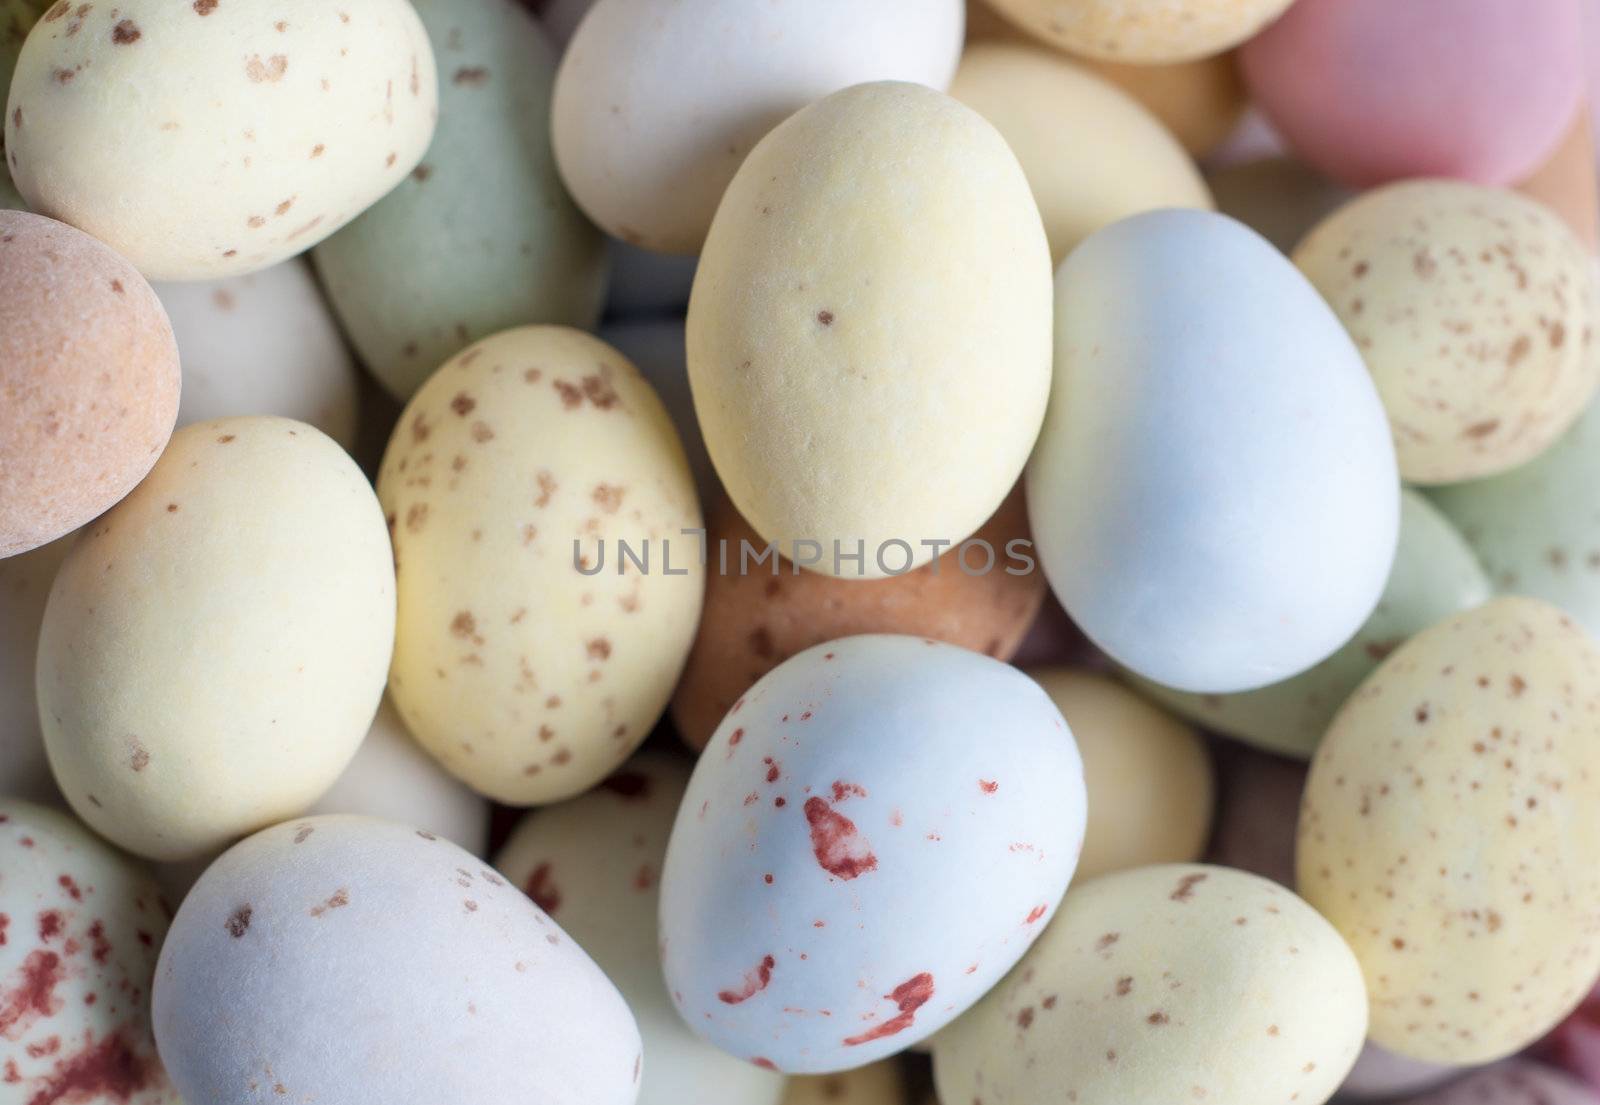 Overhead close up (macro) of a pile of Egg shaped Easter sweets (candies) in pastel shades.